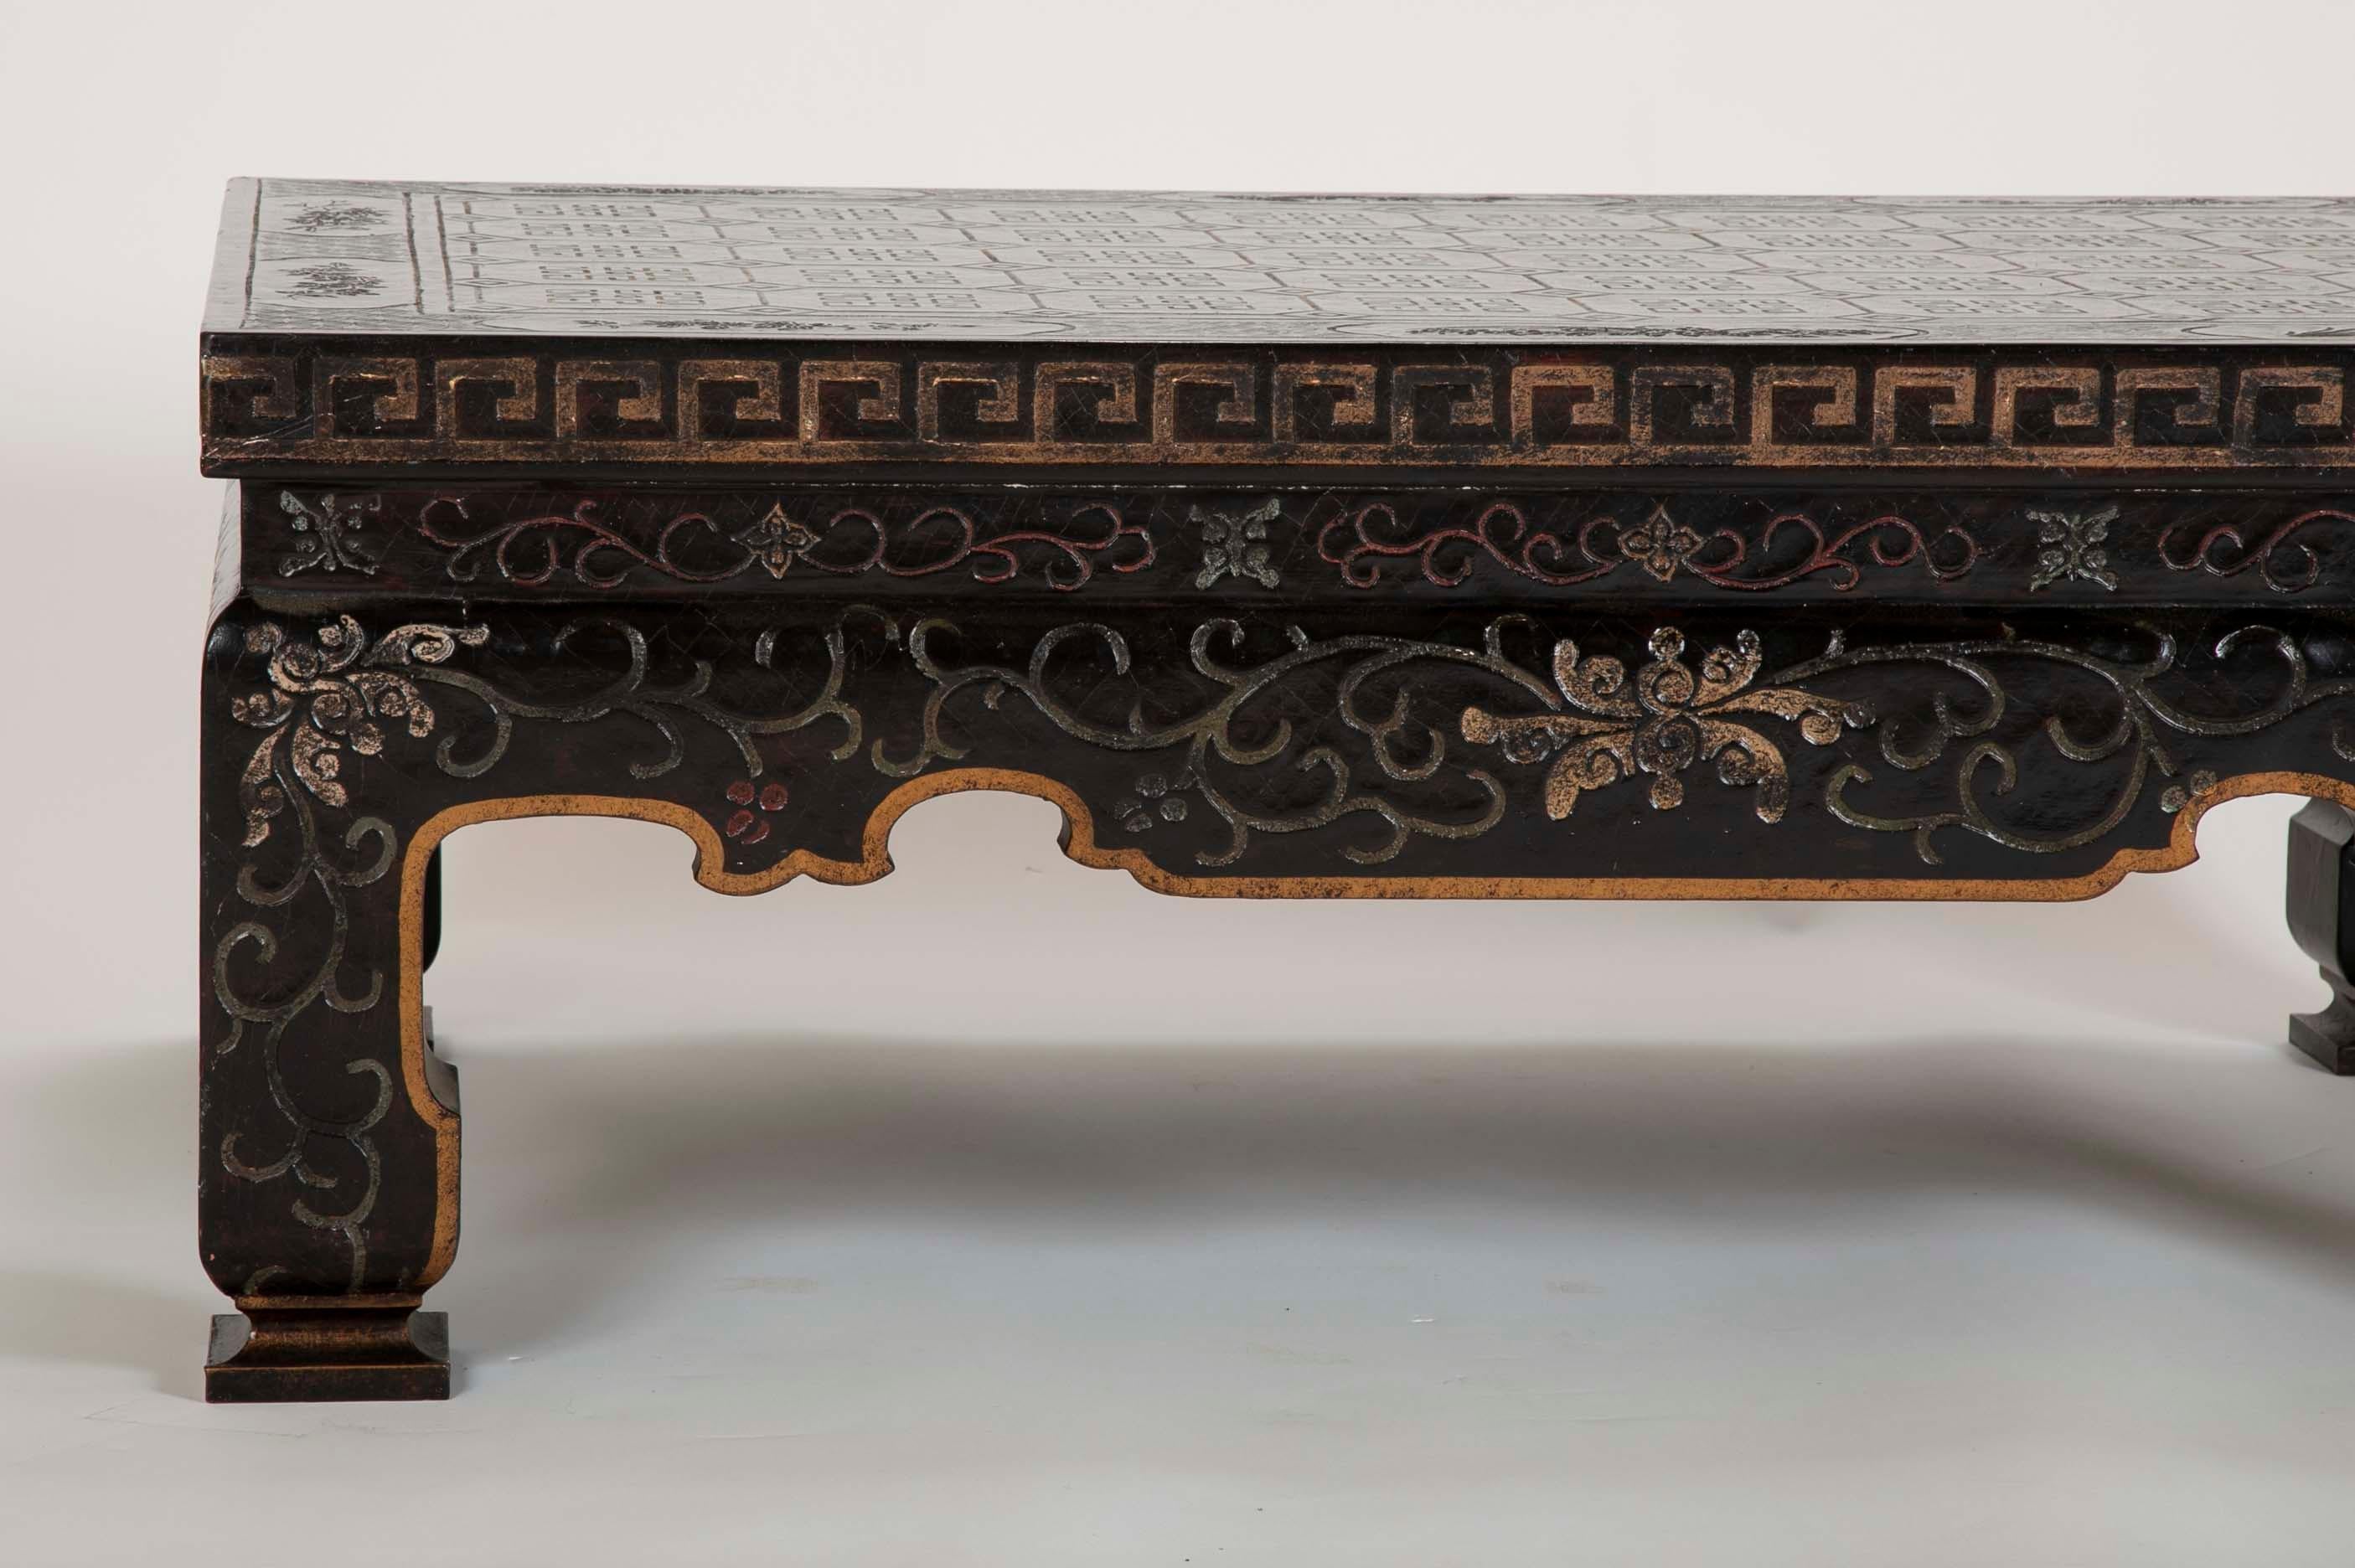 Midcentury Black Lacquer and Gilt Coffee Table with Chinoiserie Decoration 1